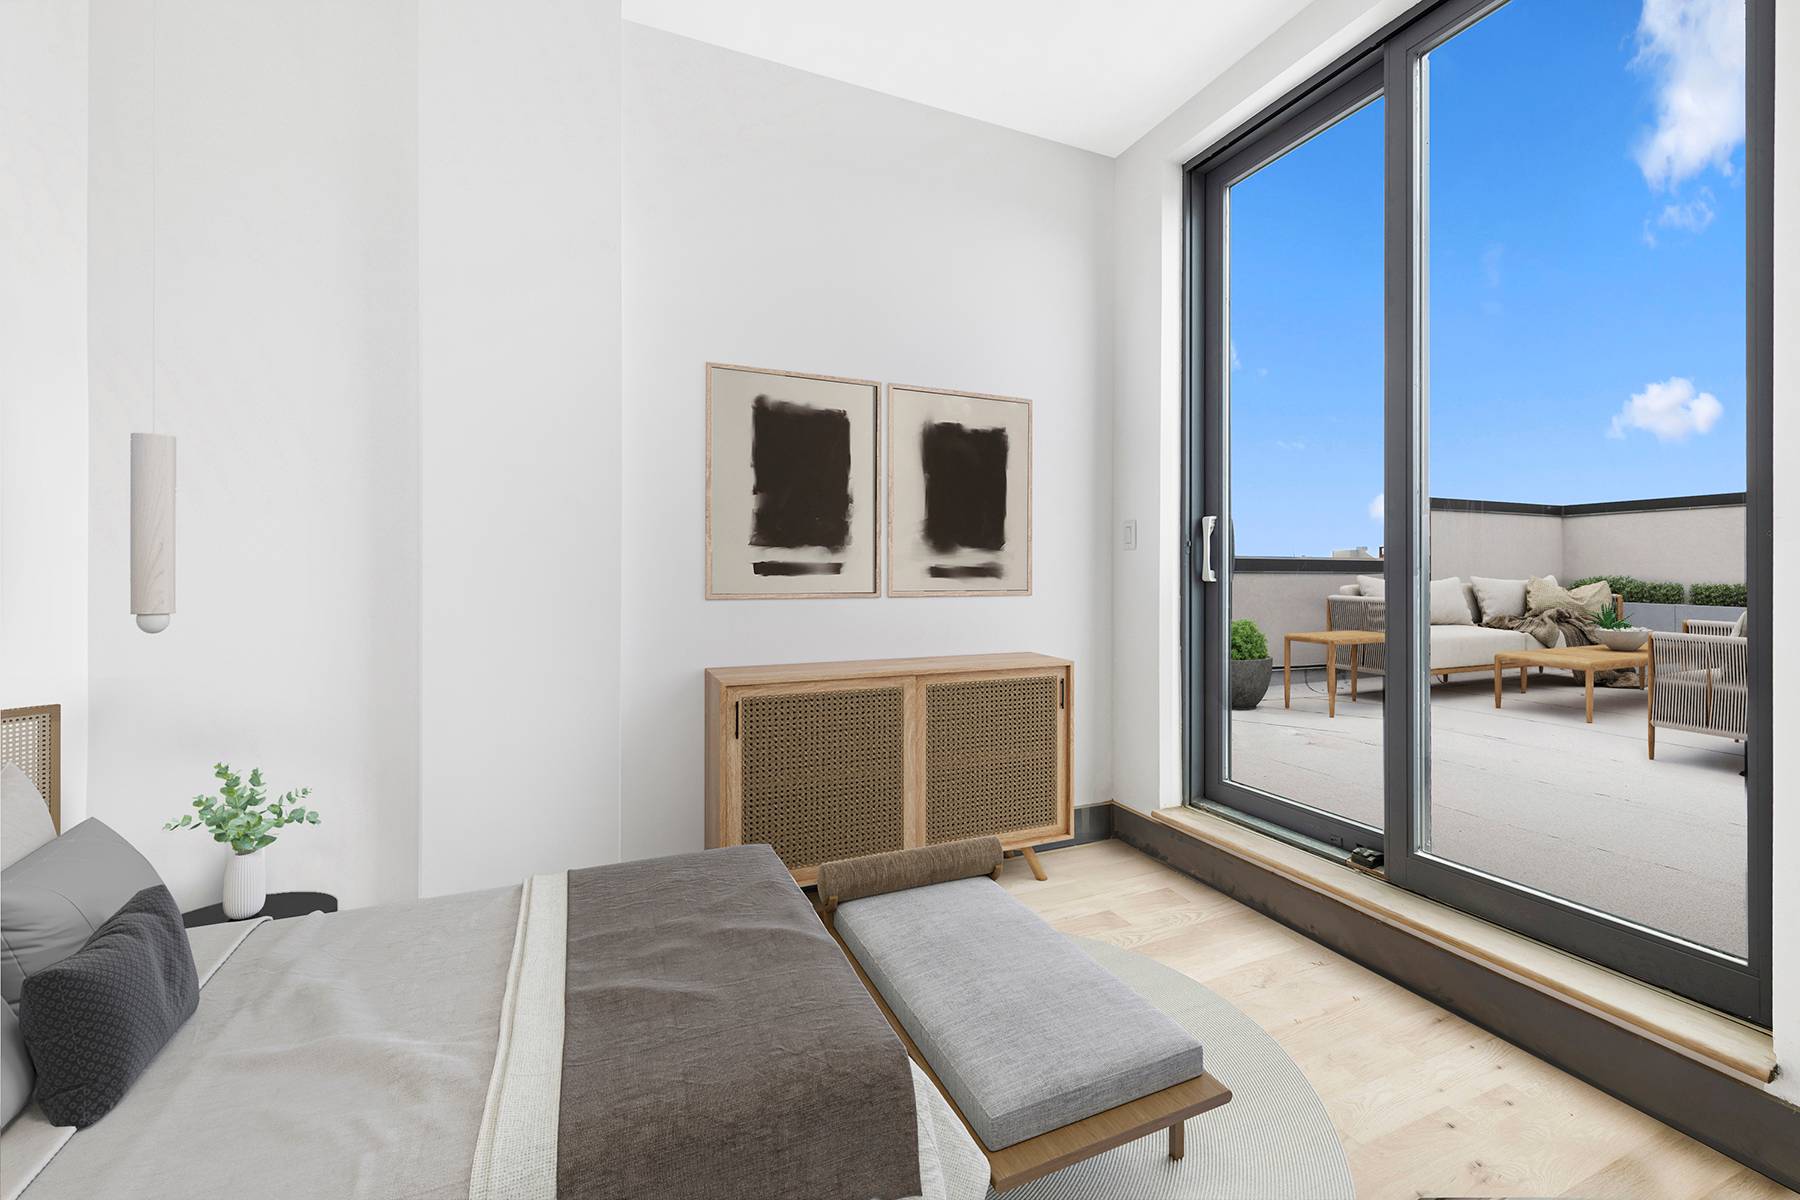 Built with an eye towards design, the newly constructed condominiums at 1490 St Johns Place, are located in the historic Weeksville area of Crown Heights.